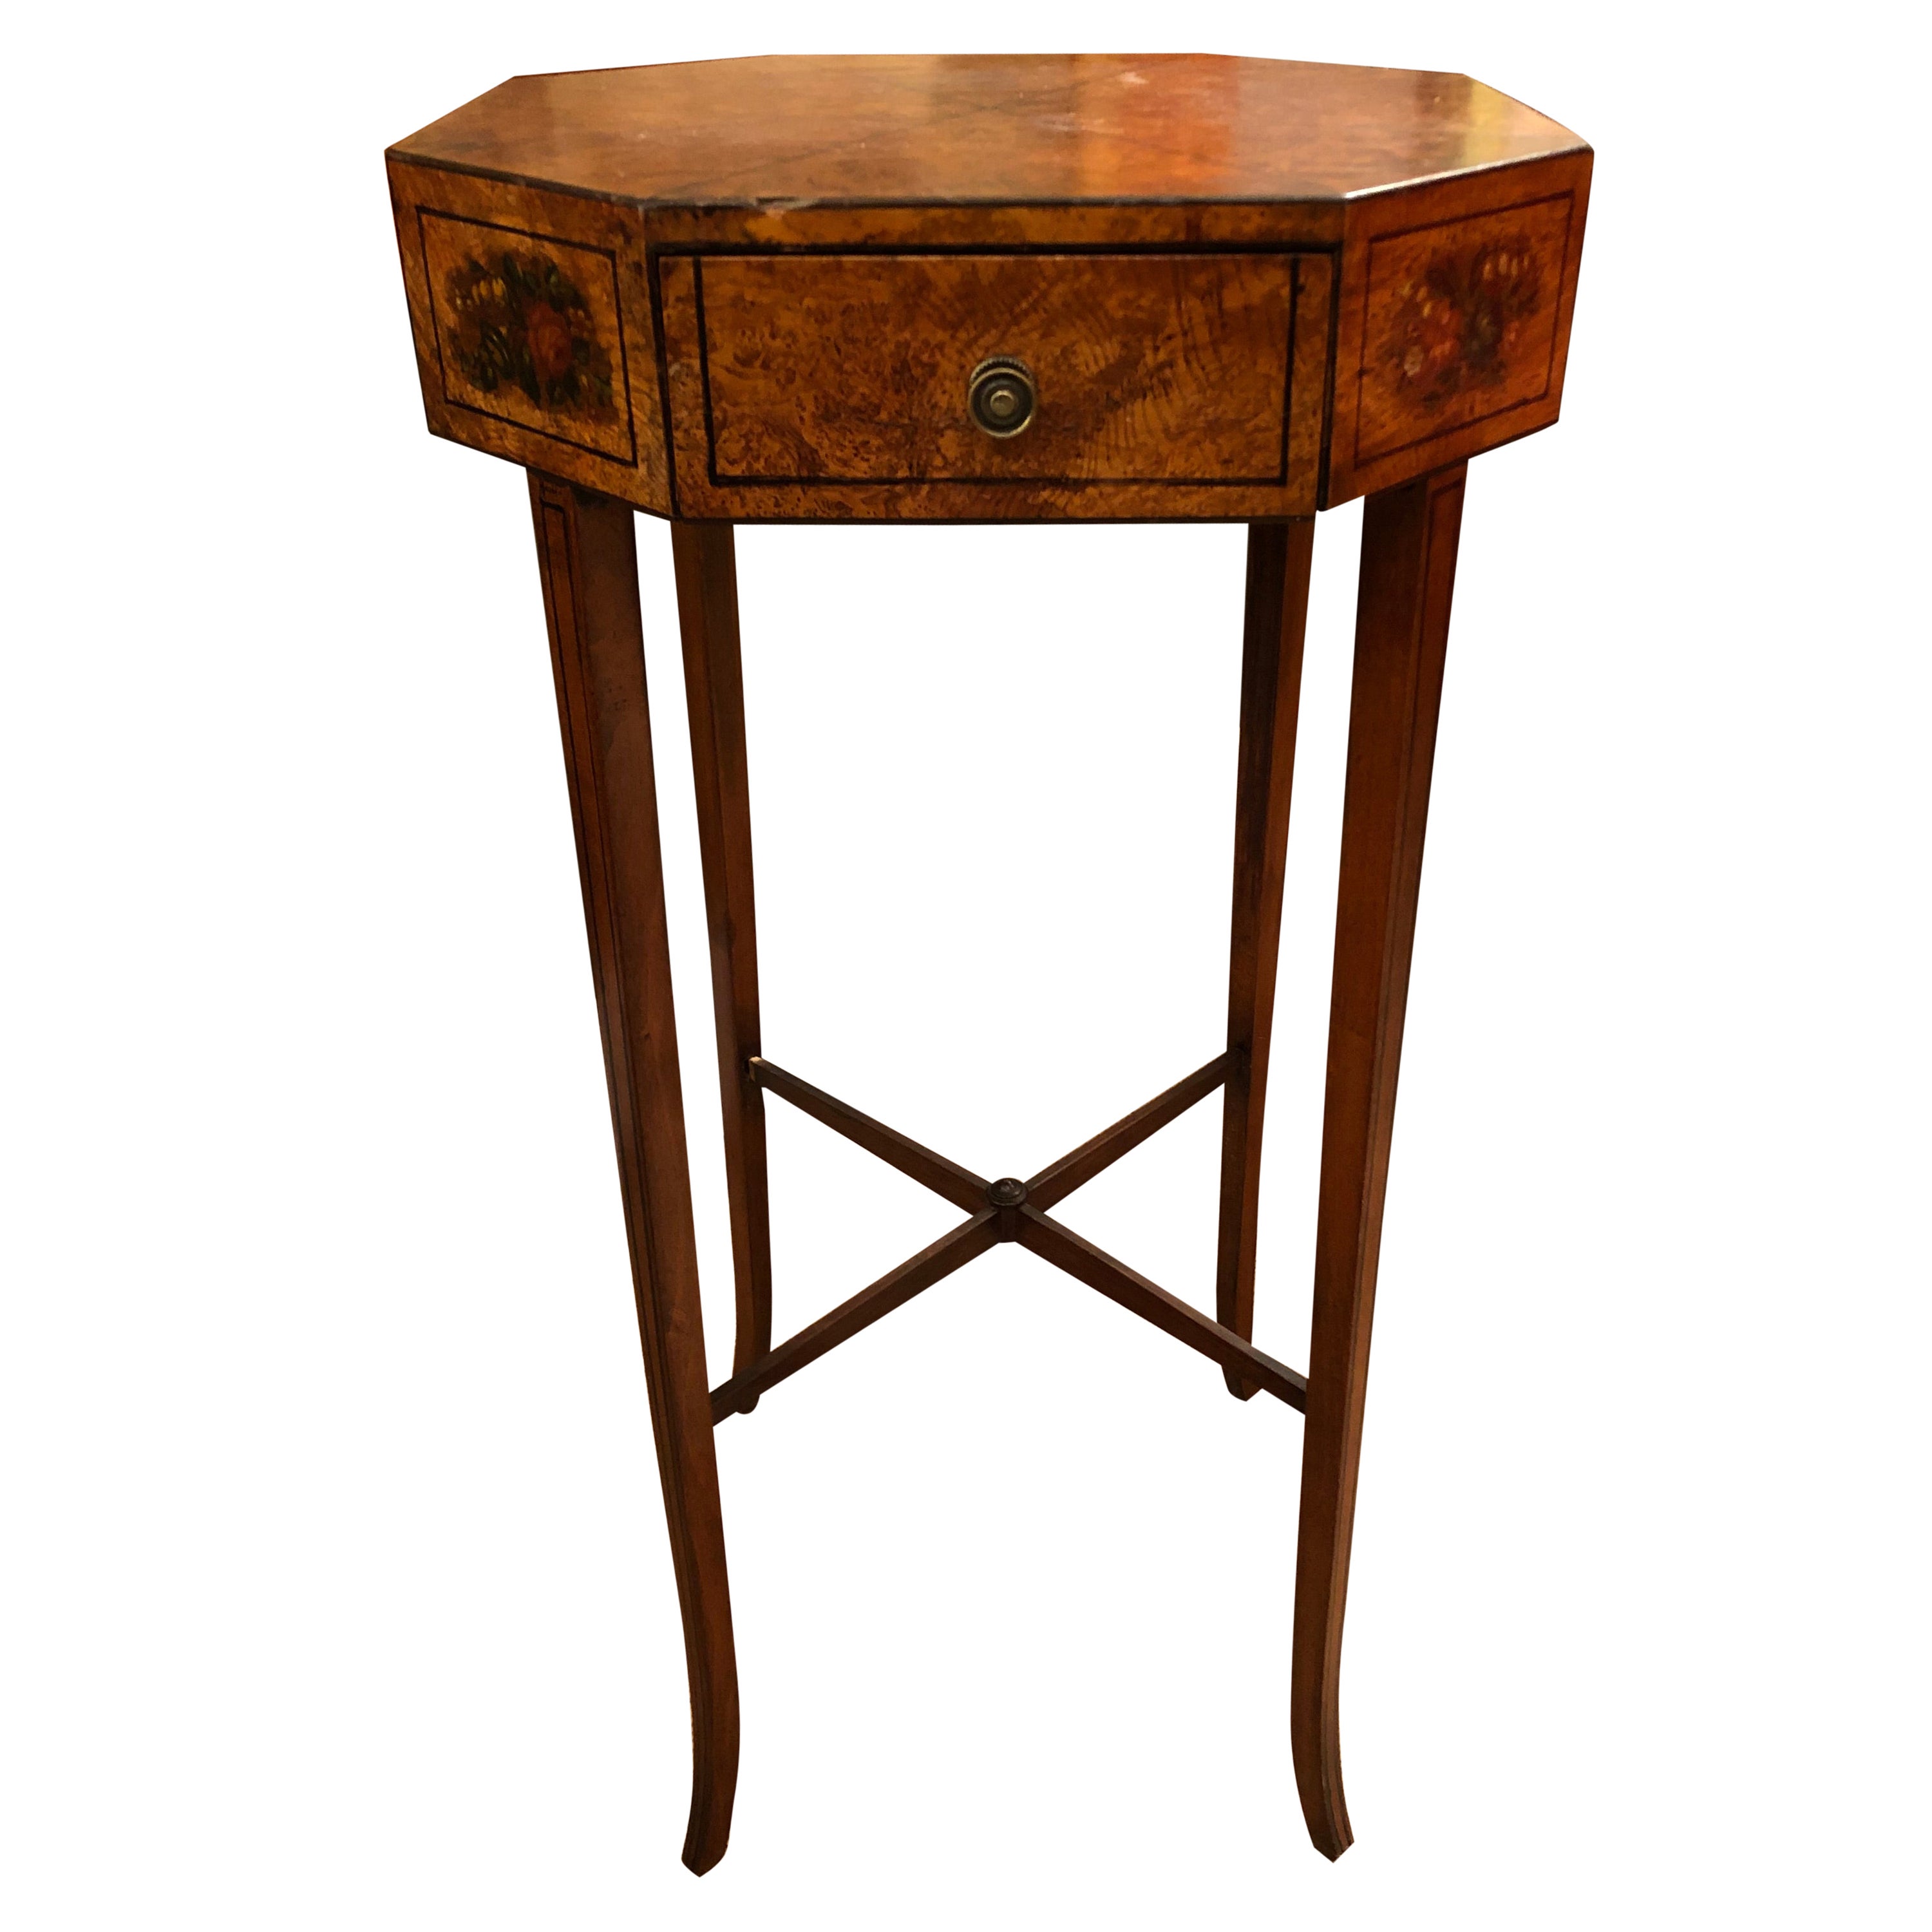 Sweet Octagonal Paint Decorated End Table